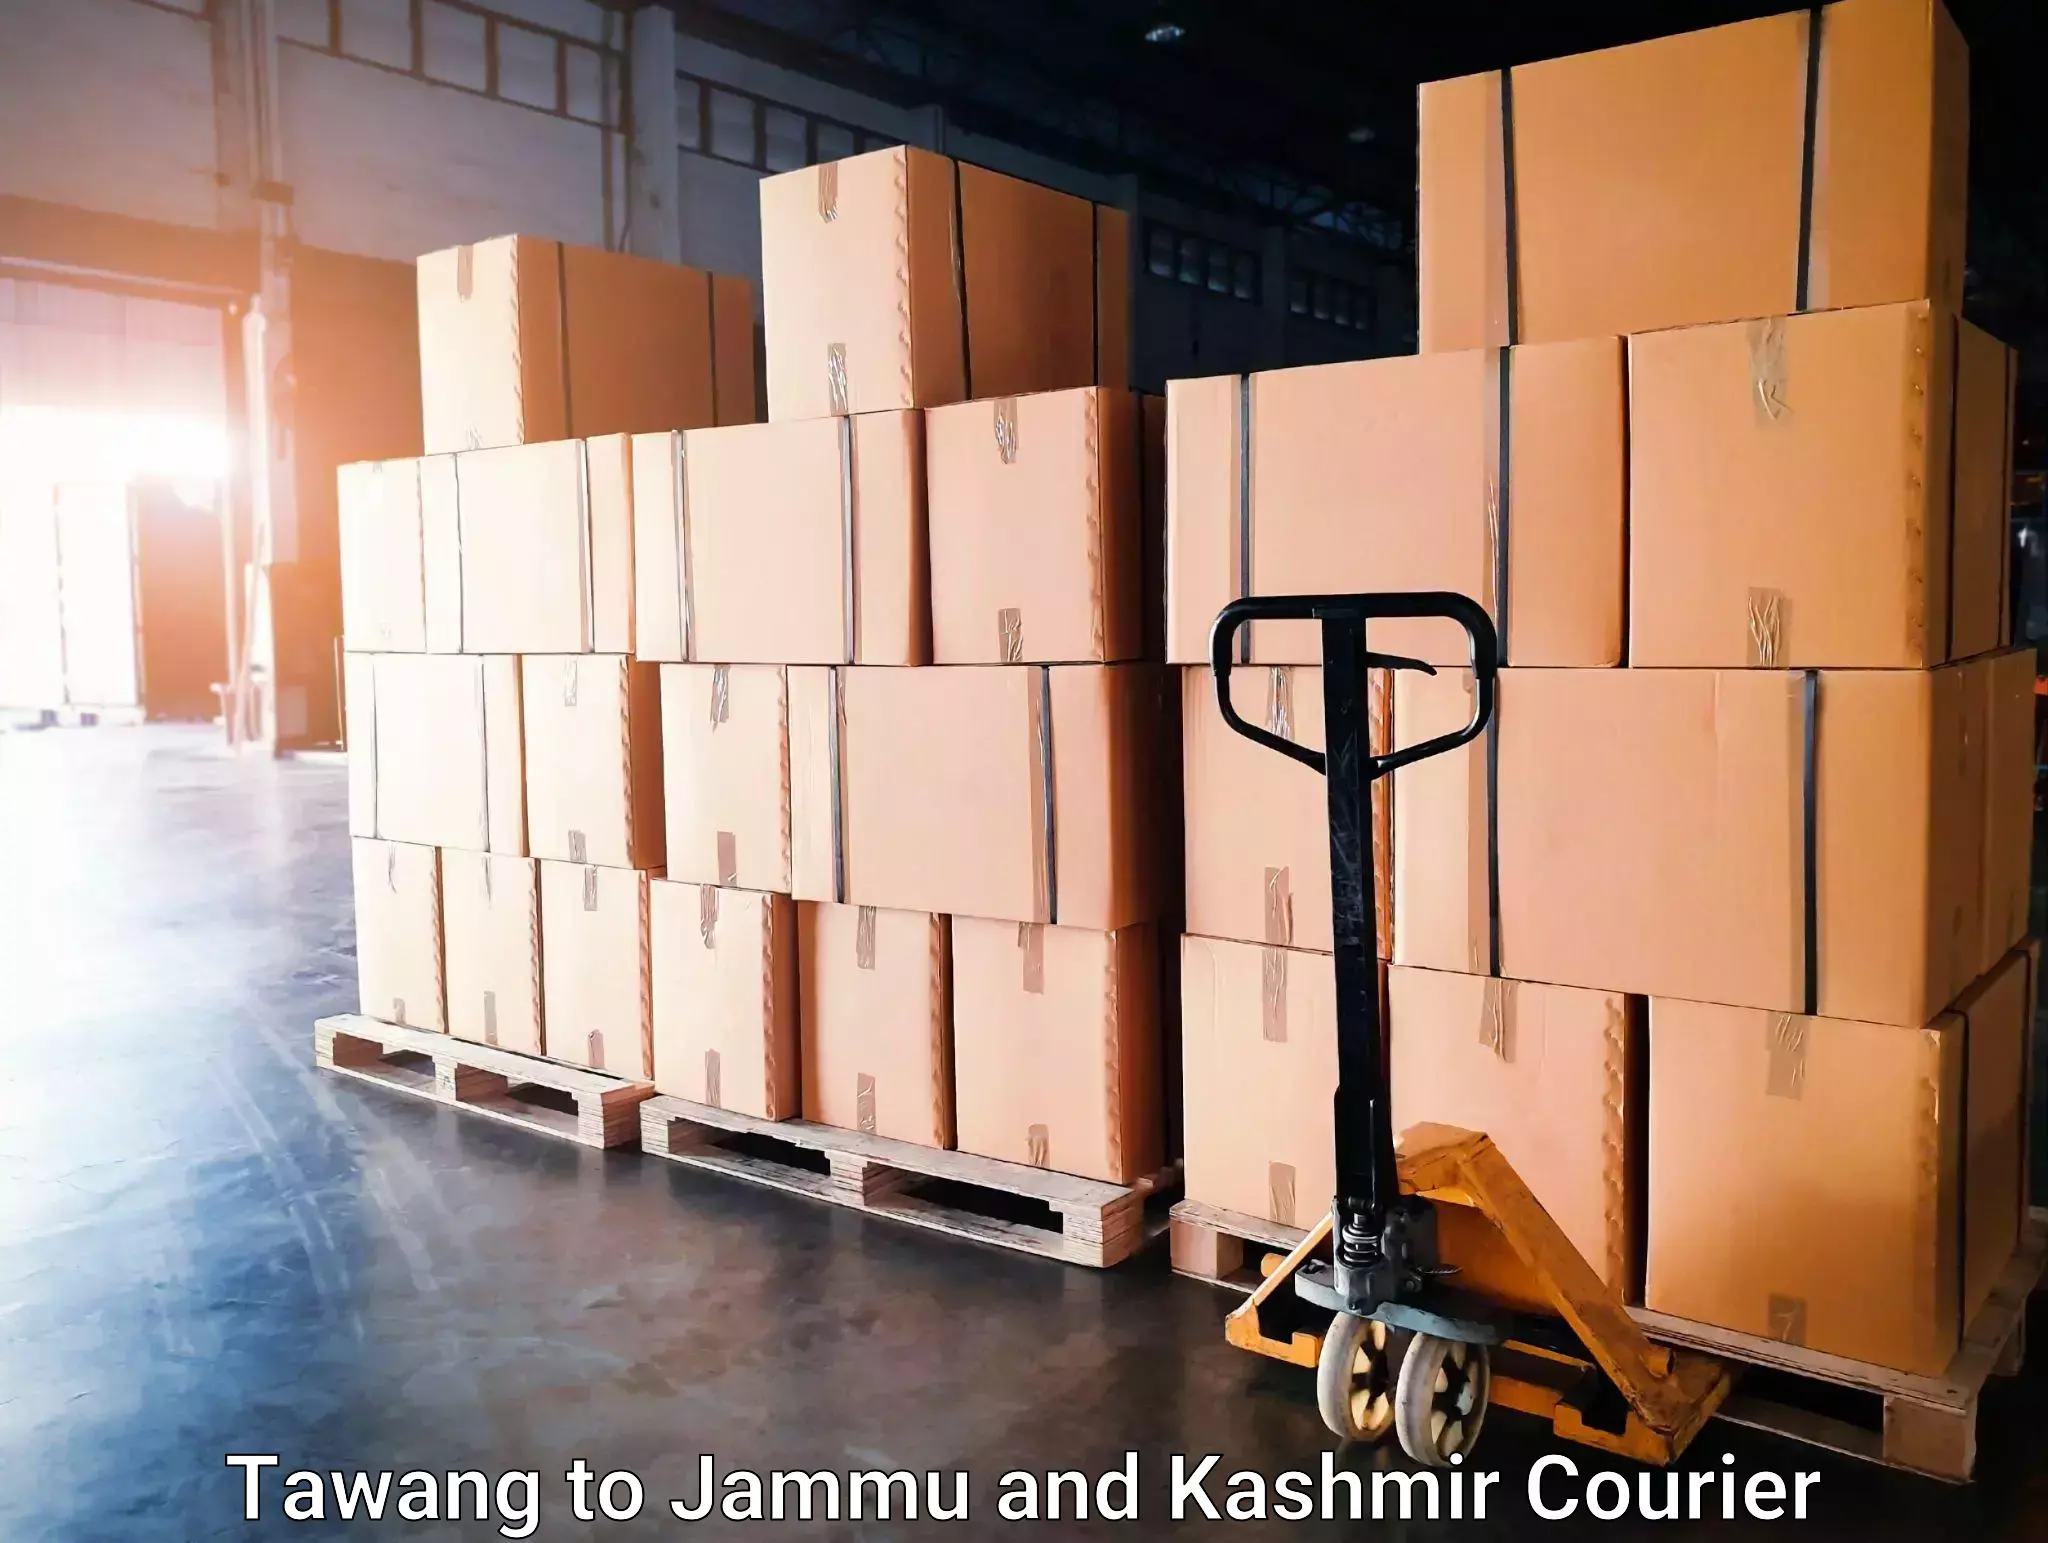 Speedy delivery service Tawang to Jammu and Kashmir